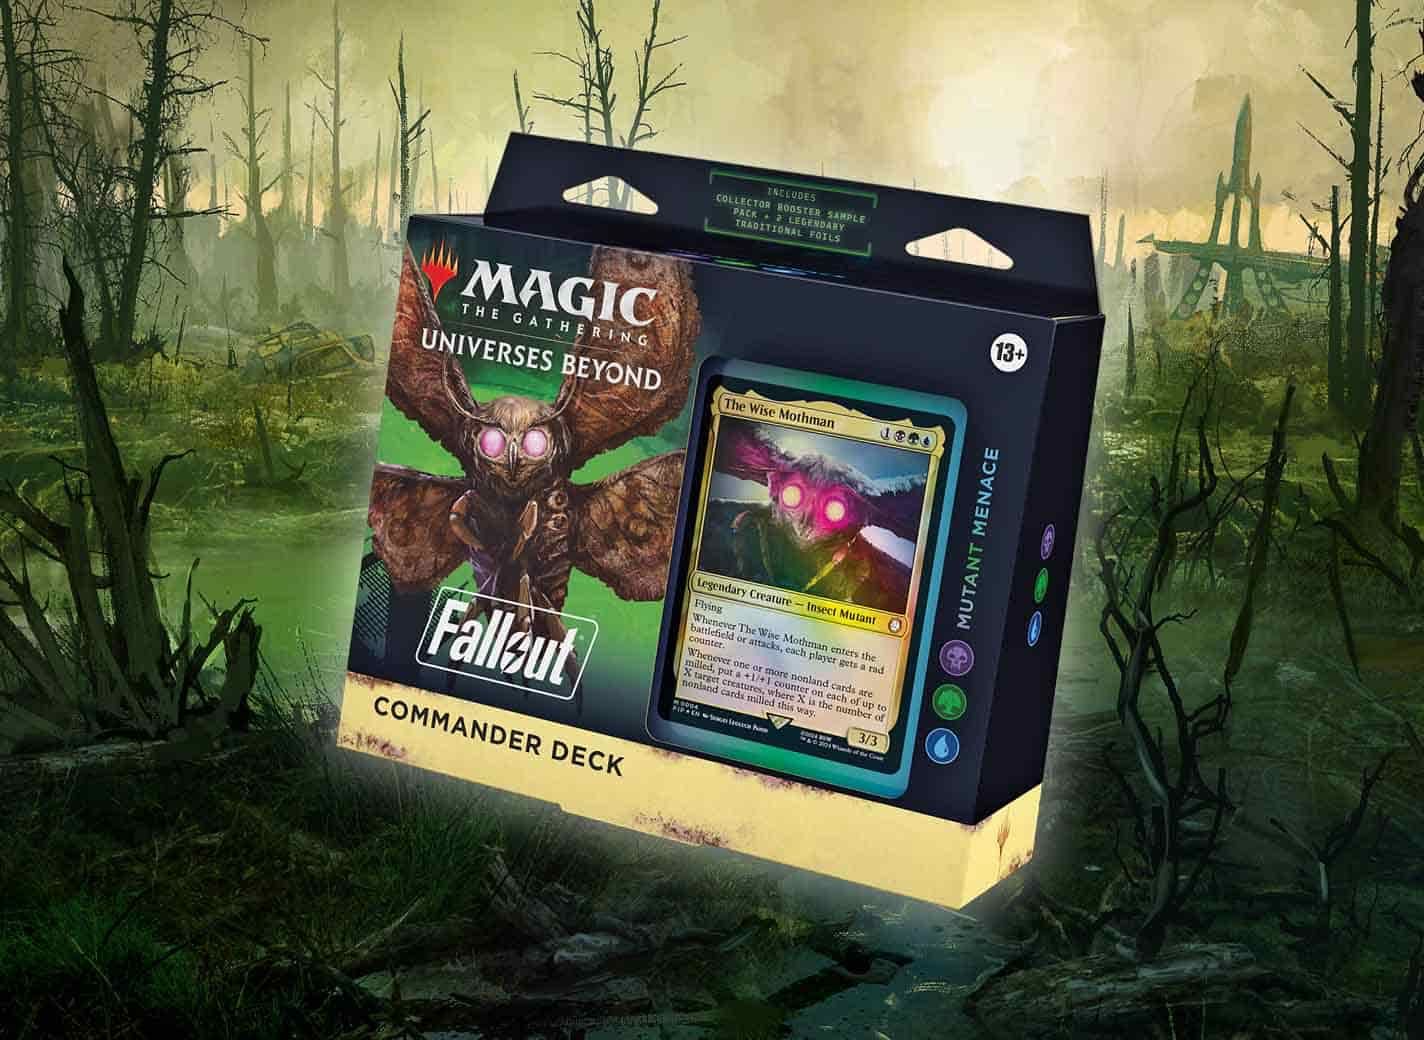 Animate Dead - Unlimited Edition - Magic: The Gathering